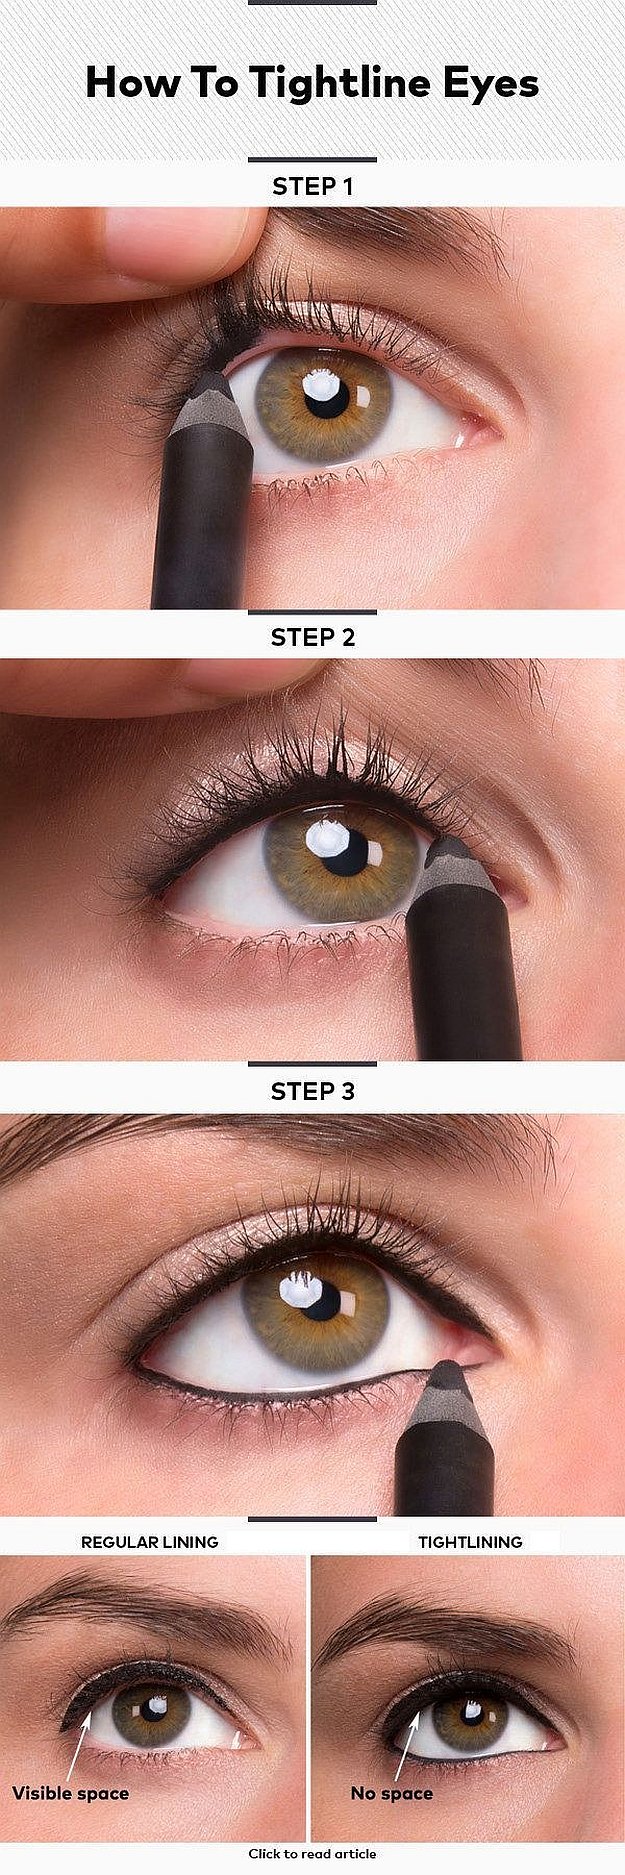 How-to-Tightline-Eyes